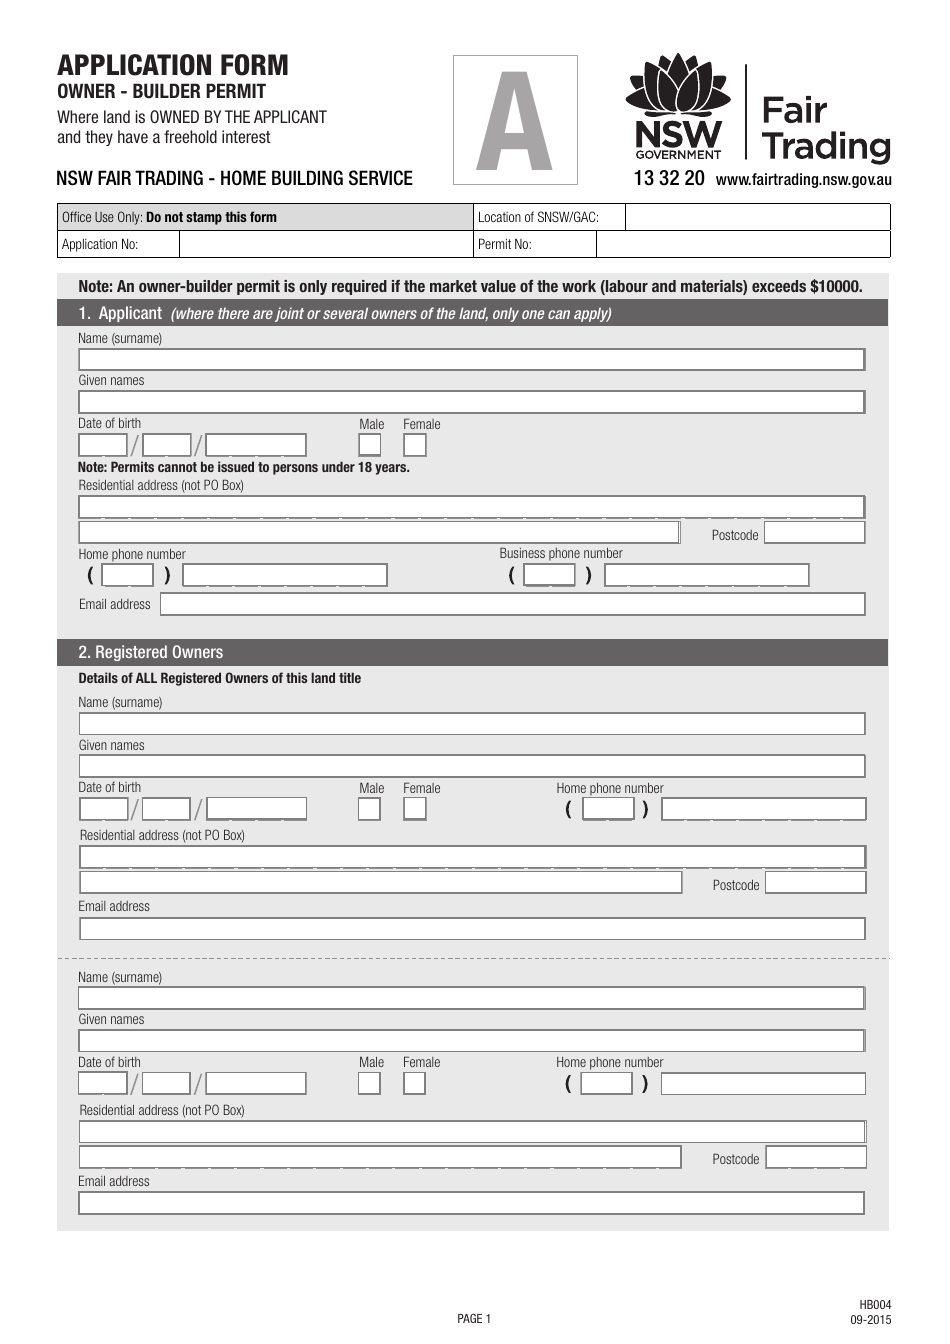 Form HB004 Application Form Owner - Builder Permit - New South Wales, Australia, Page 1